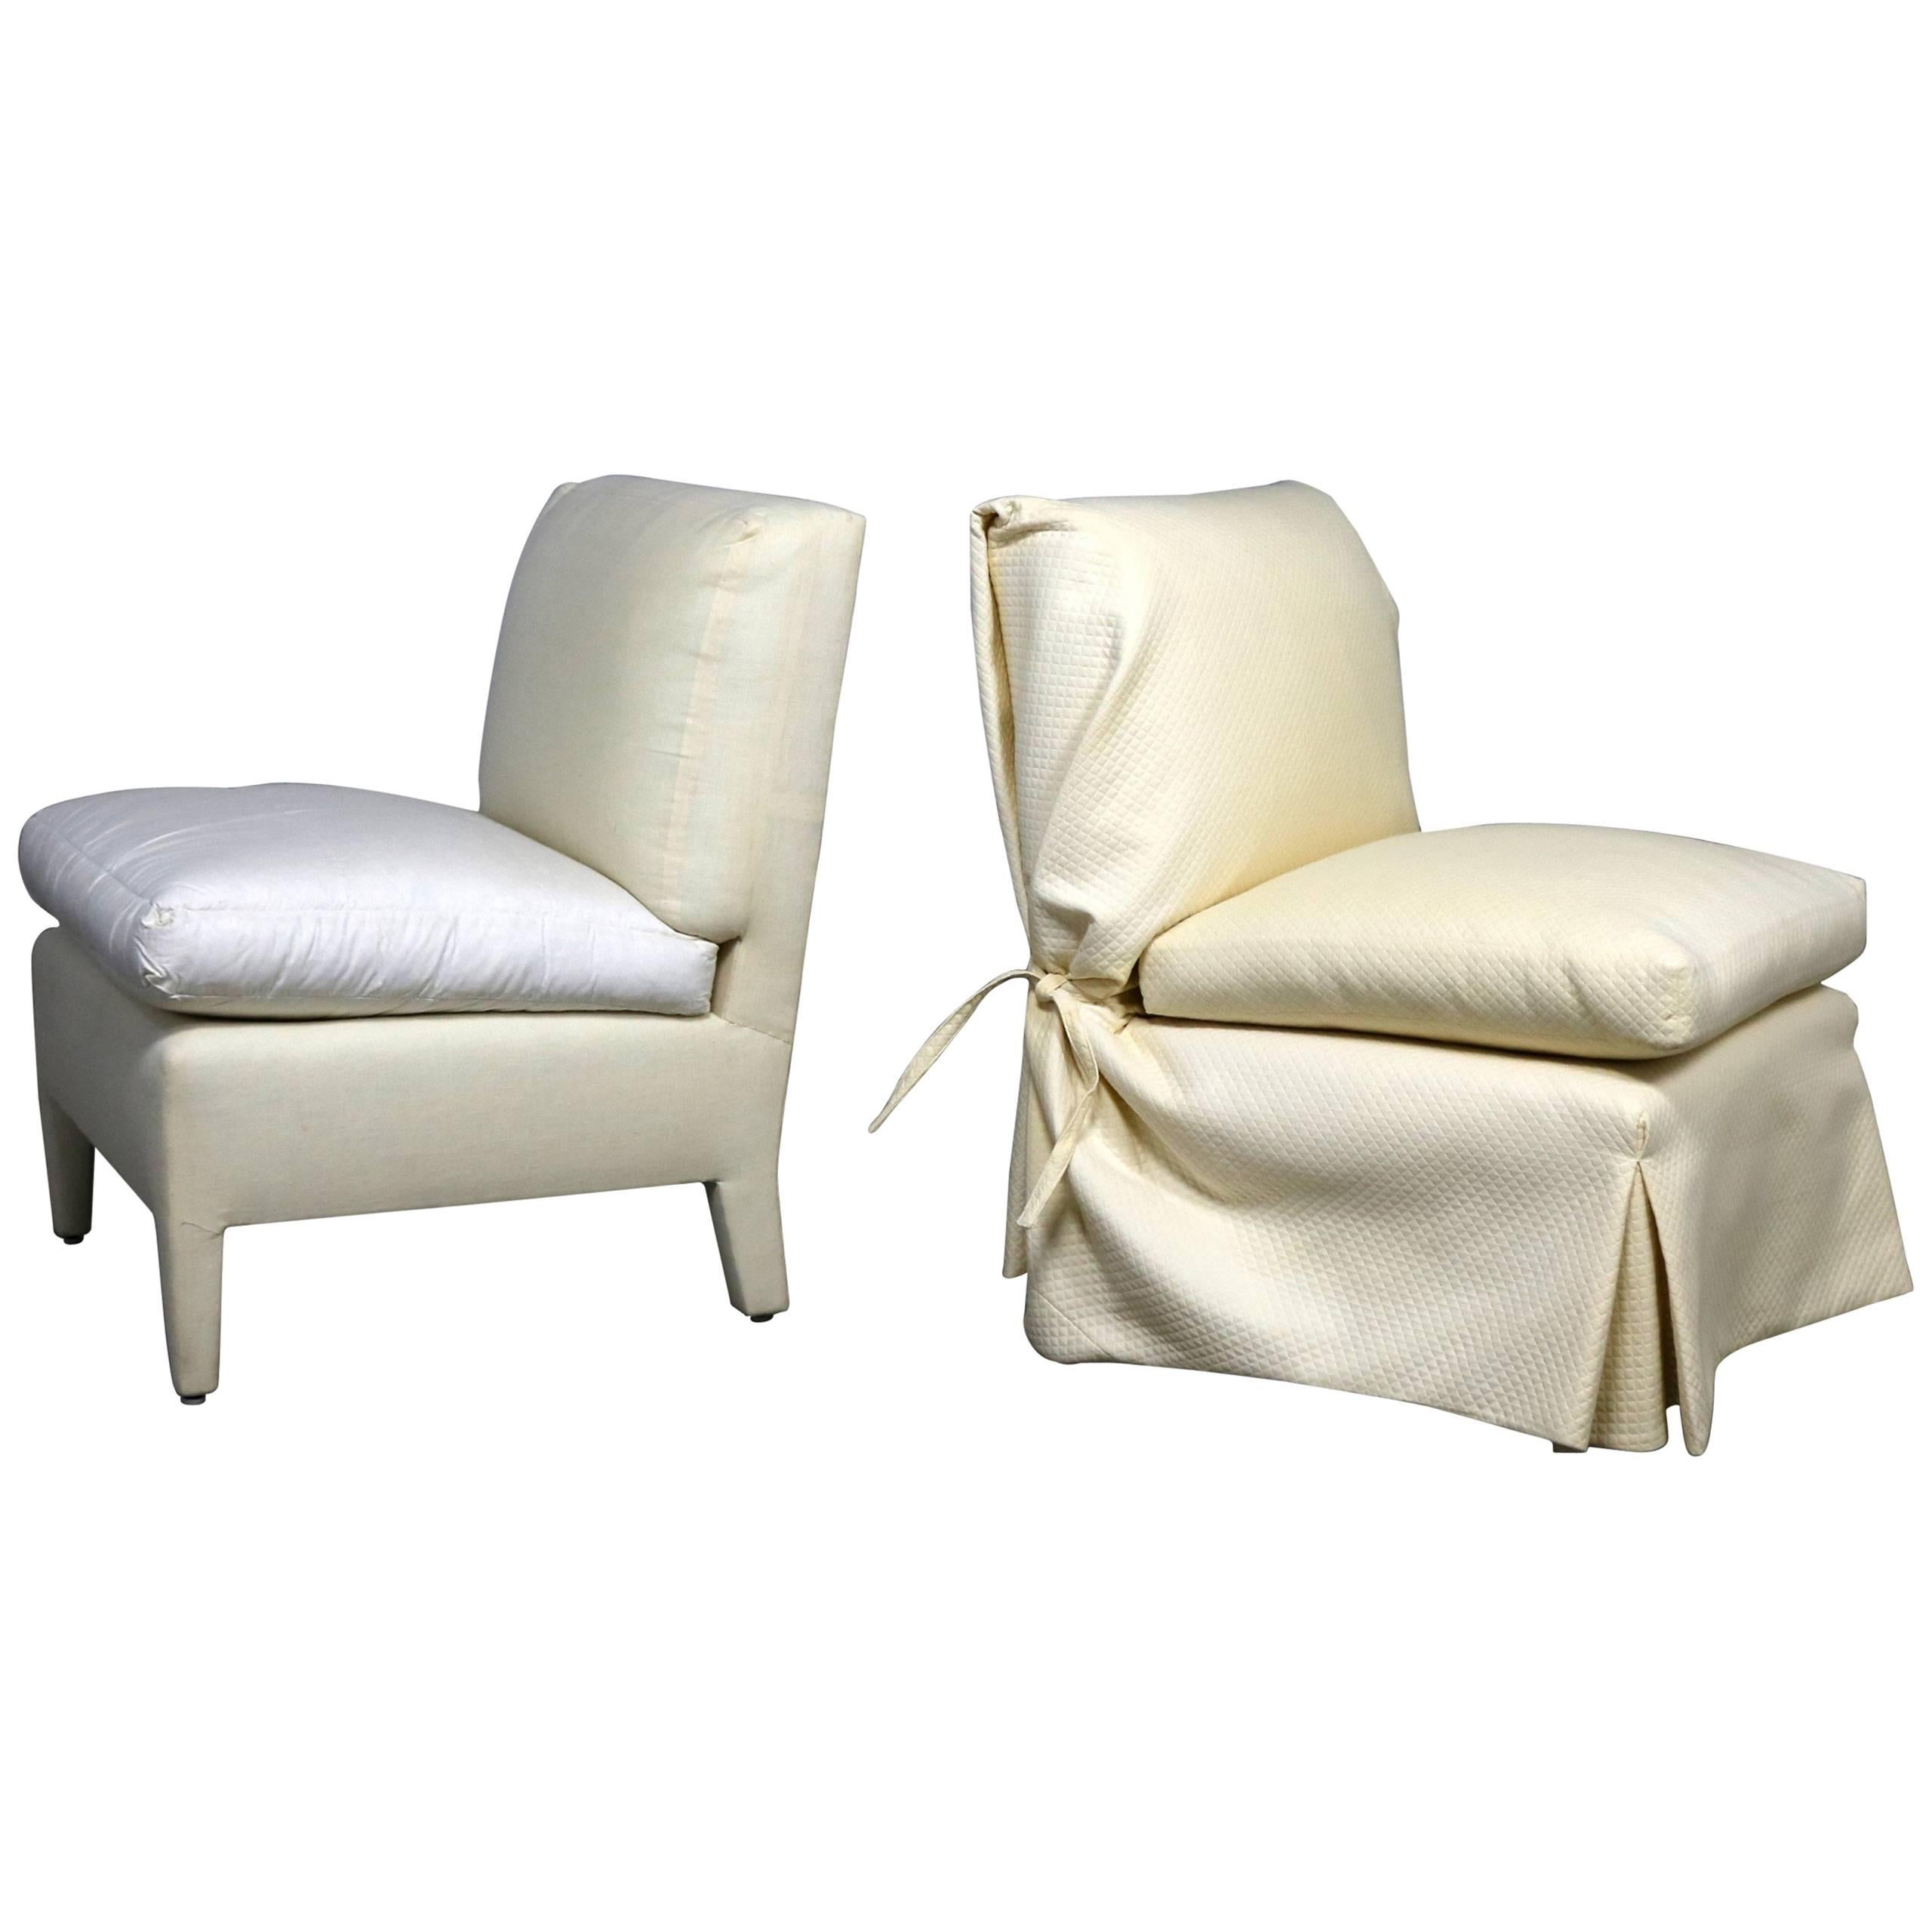 Donghia Slipper Chair by Angelo Donghia, One Slipcovered One Not